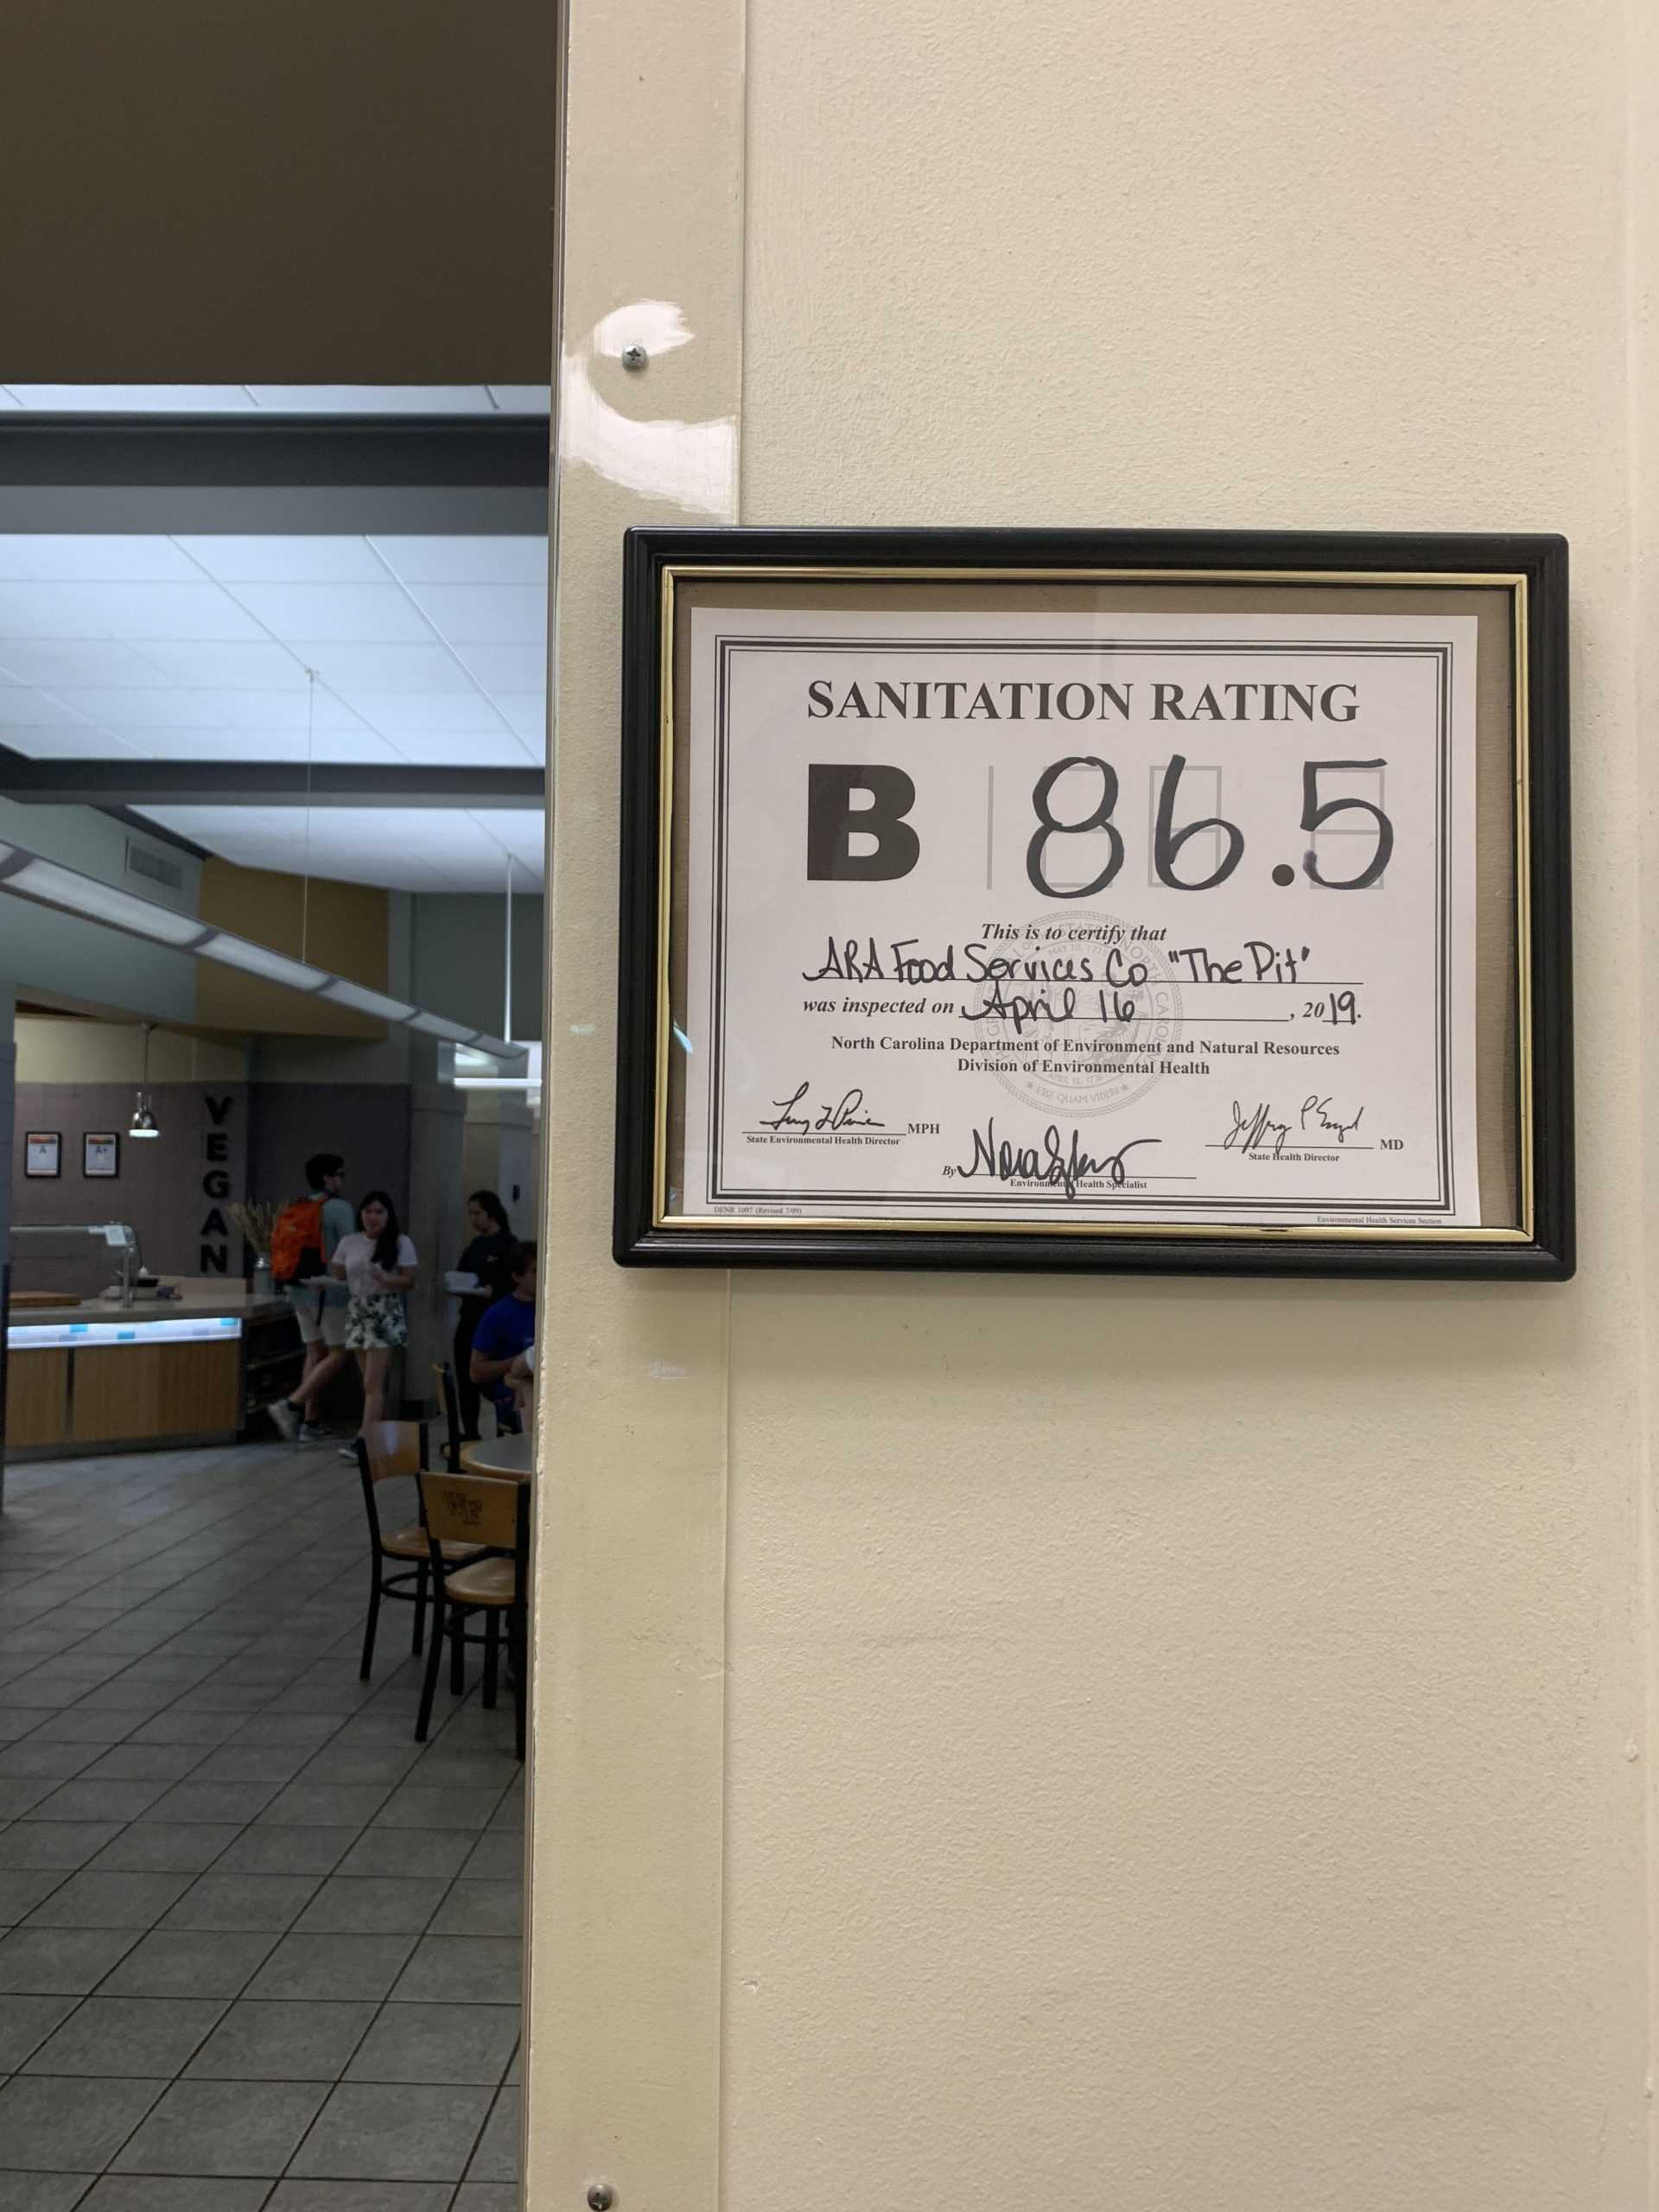 Pit Receives Lower Sanitary Inspection Rating